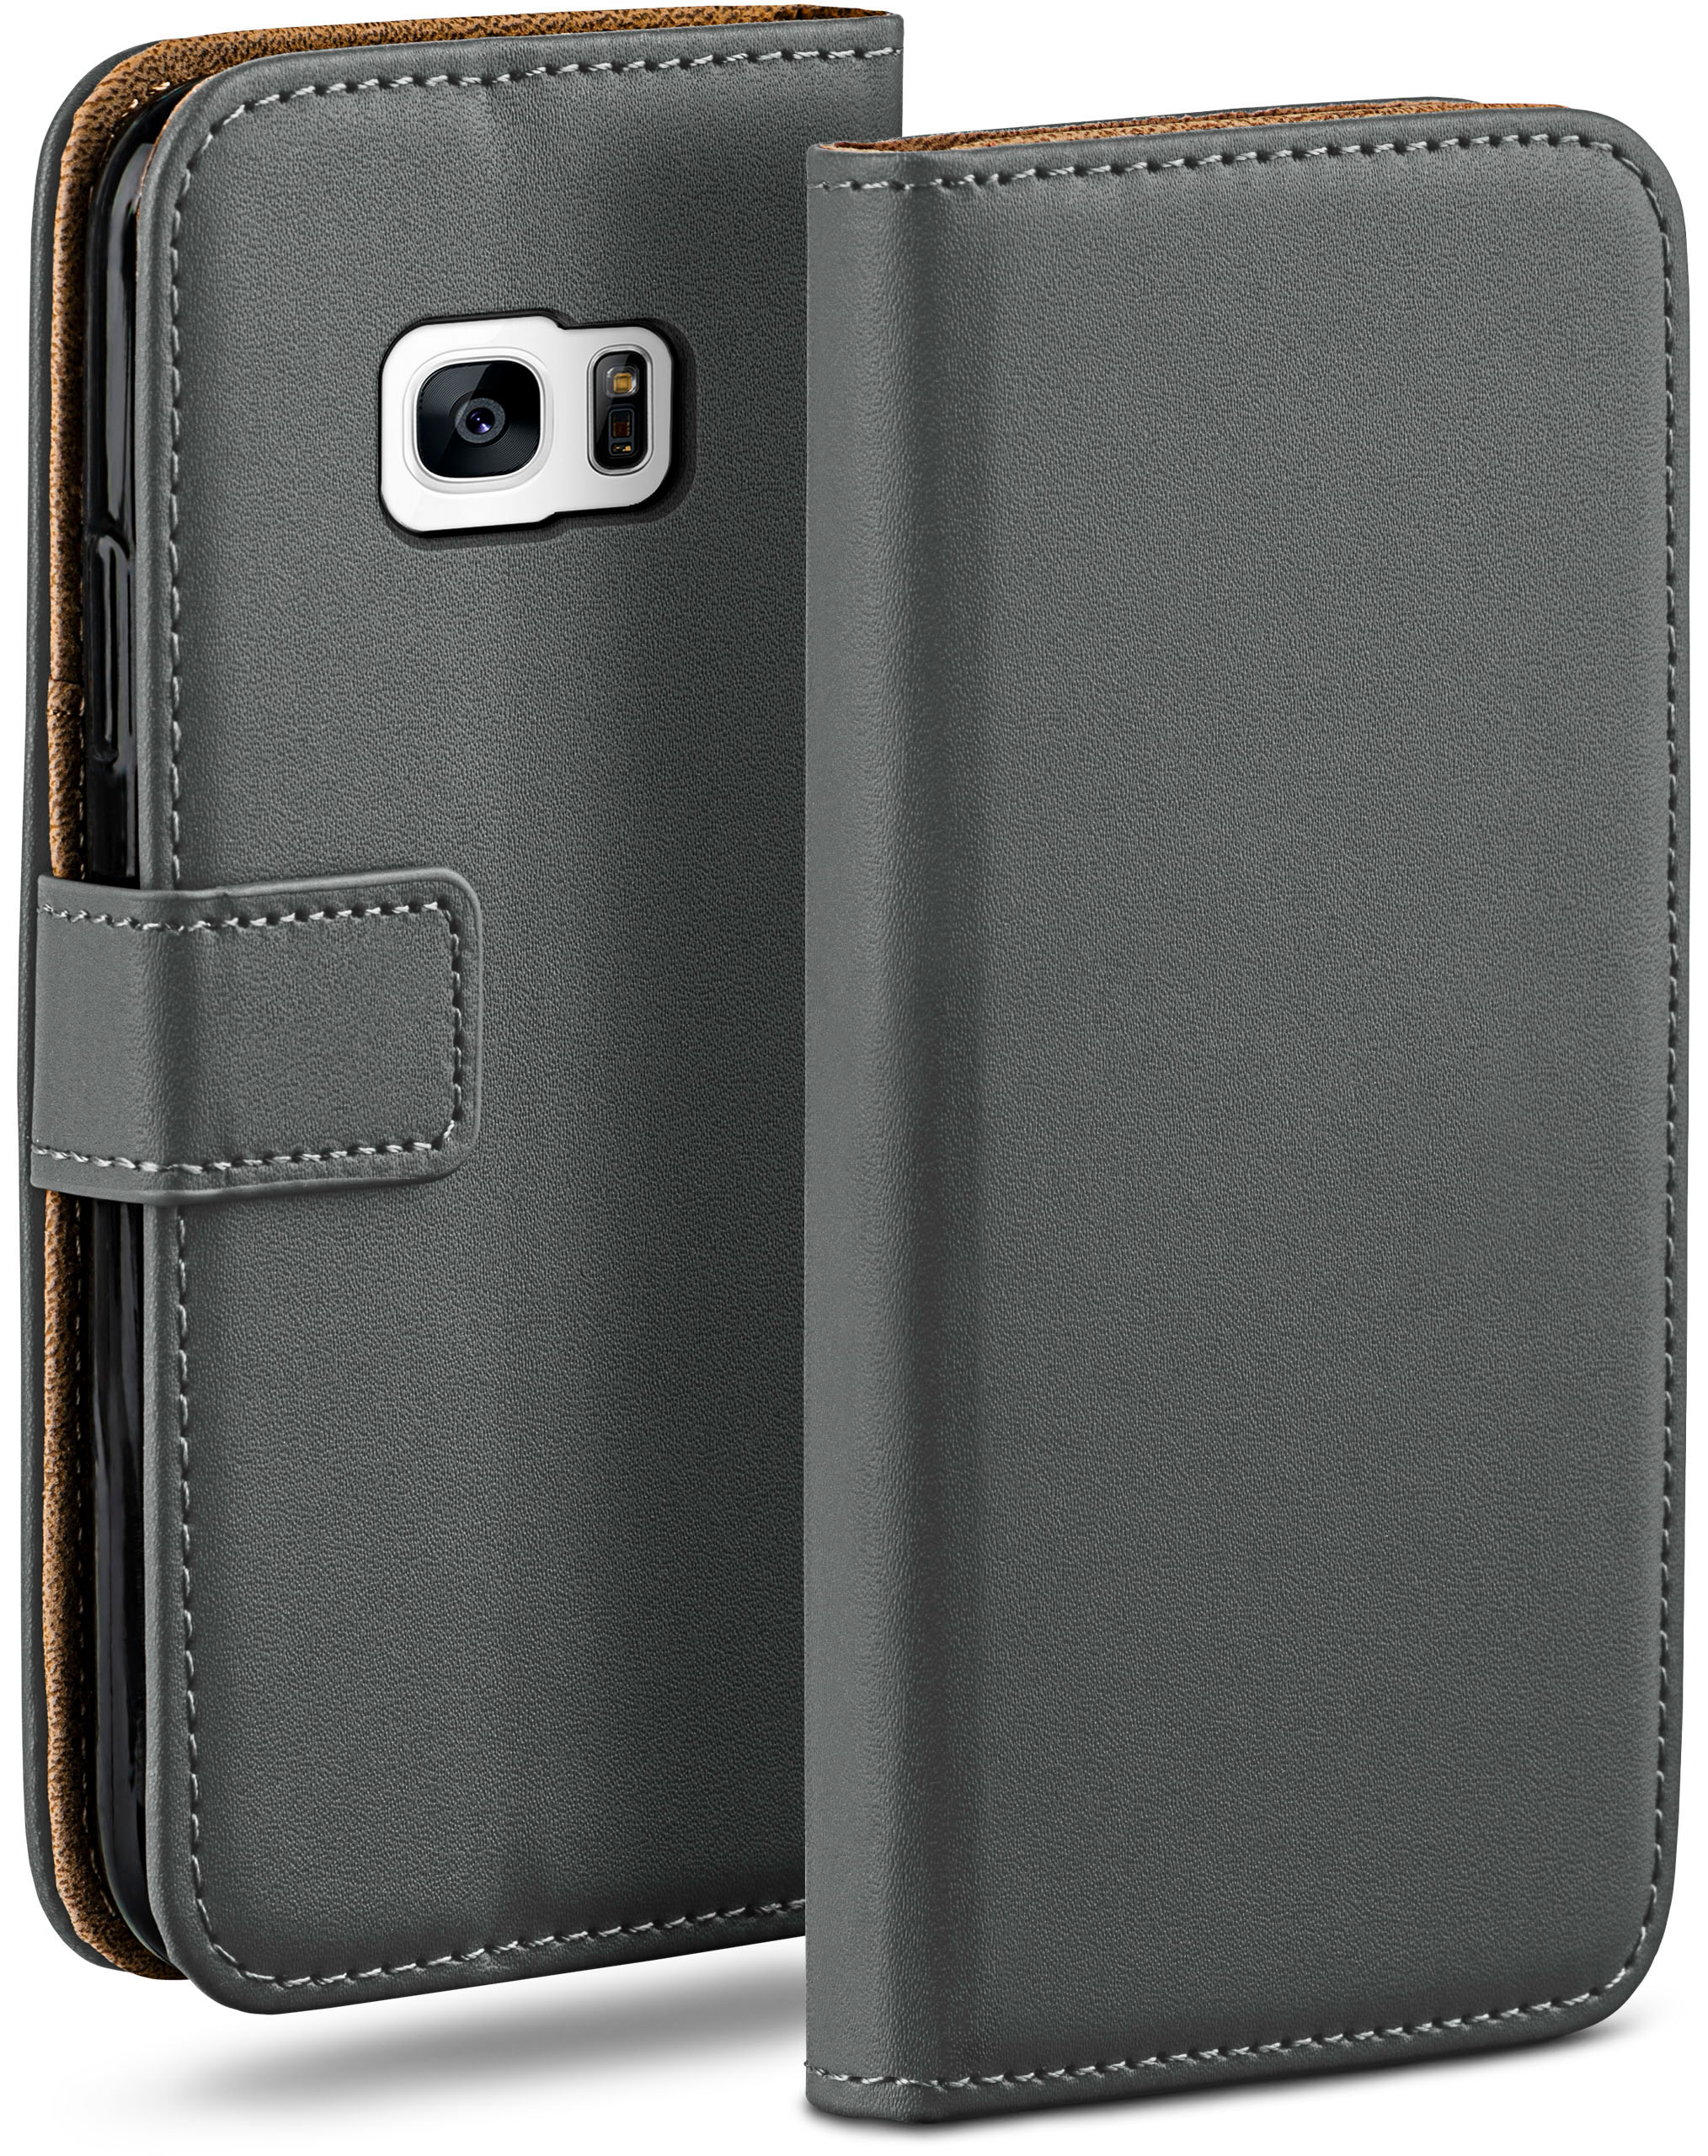 Galaxy Samsung, S7, Book Case, Anthracite-Gray MOEX Bookcover,